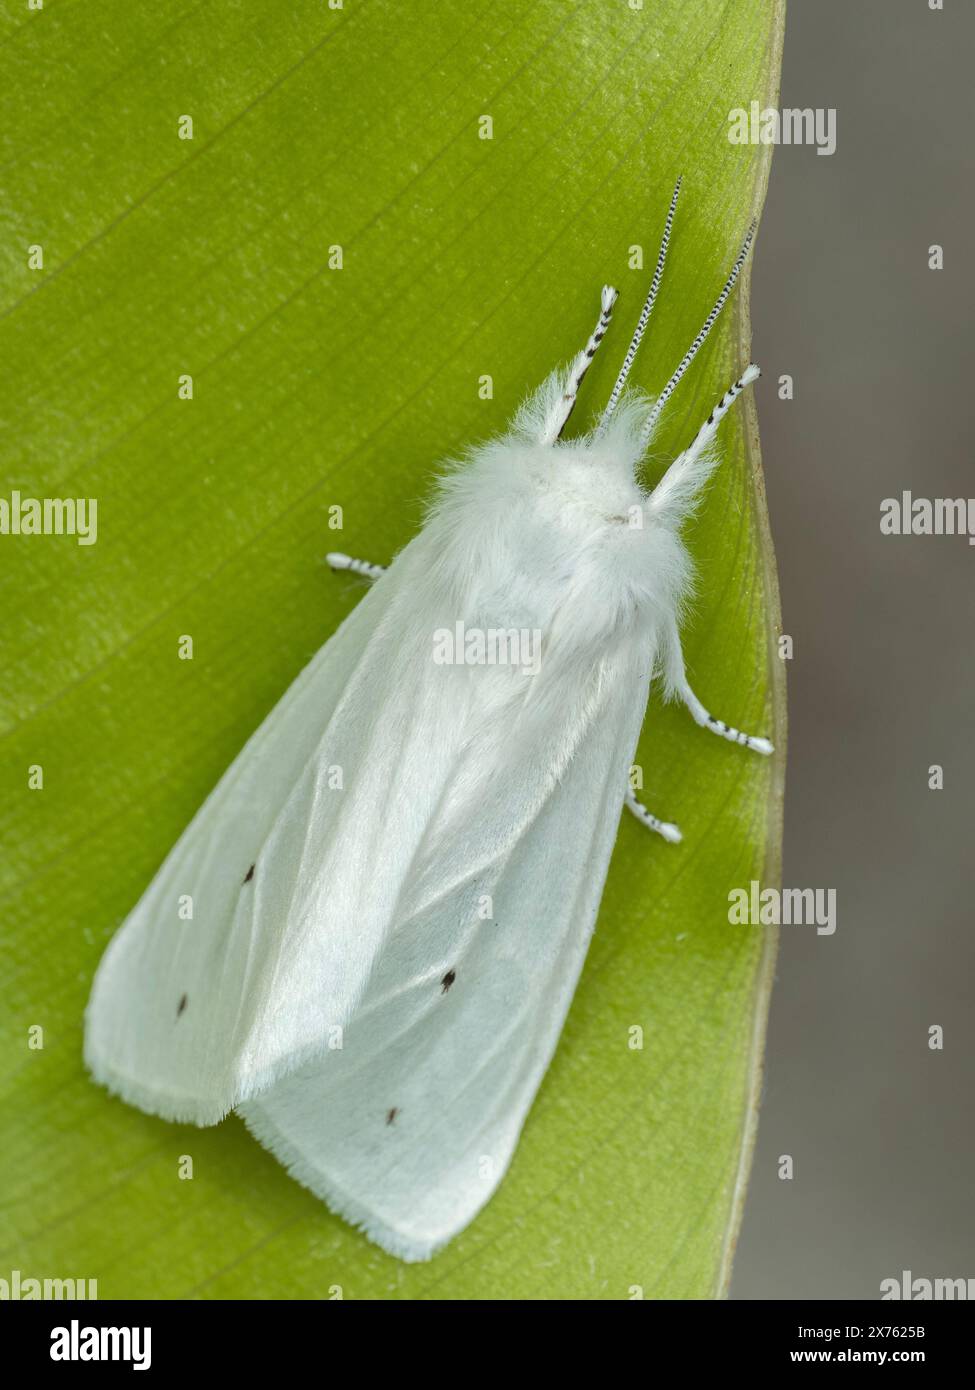 fluffy white Virginian tiger moth (Spilosoma virginica) resting on a green leaf in Delta, British Columbia, Canada Stock Photo